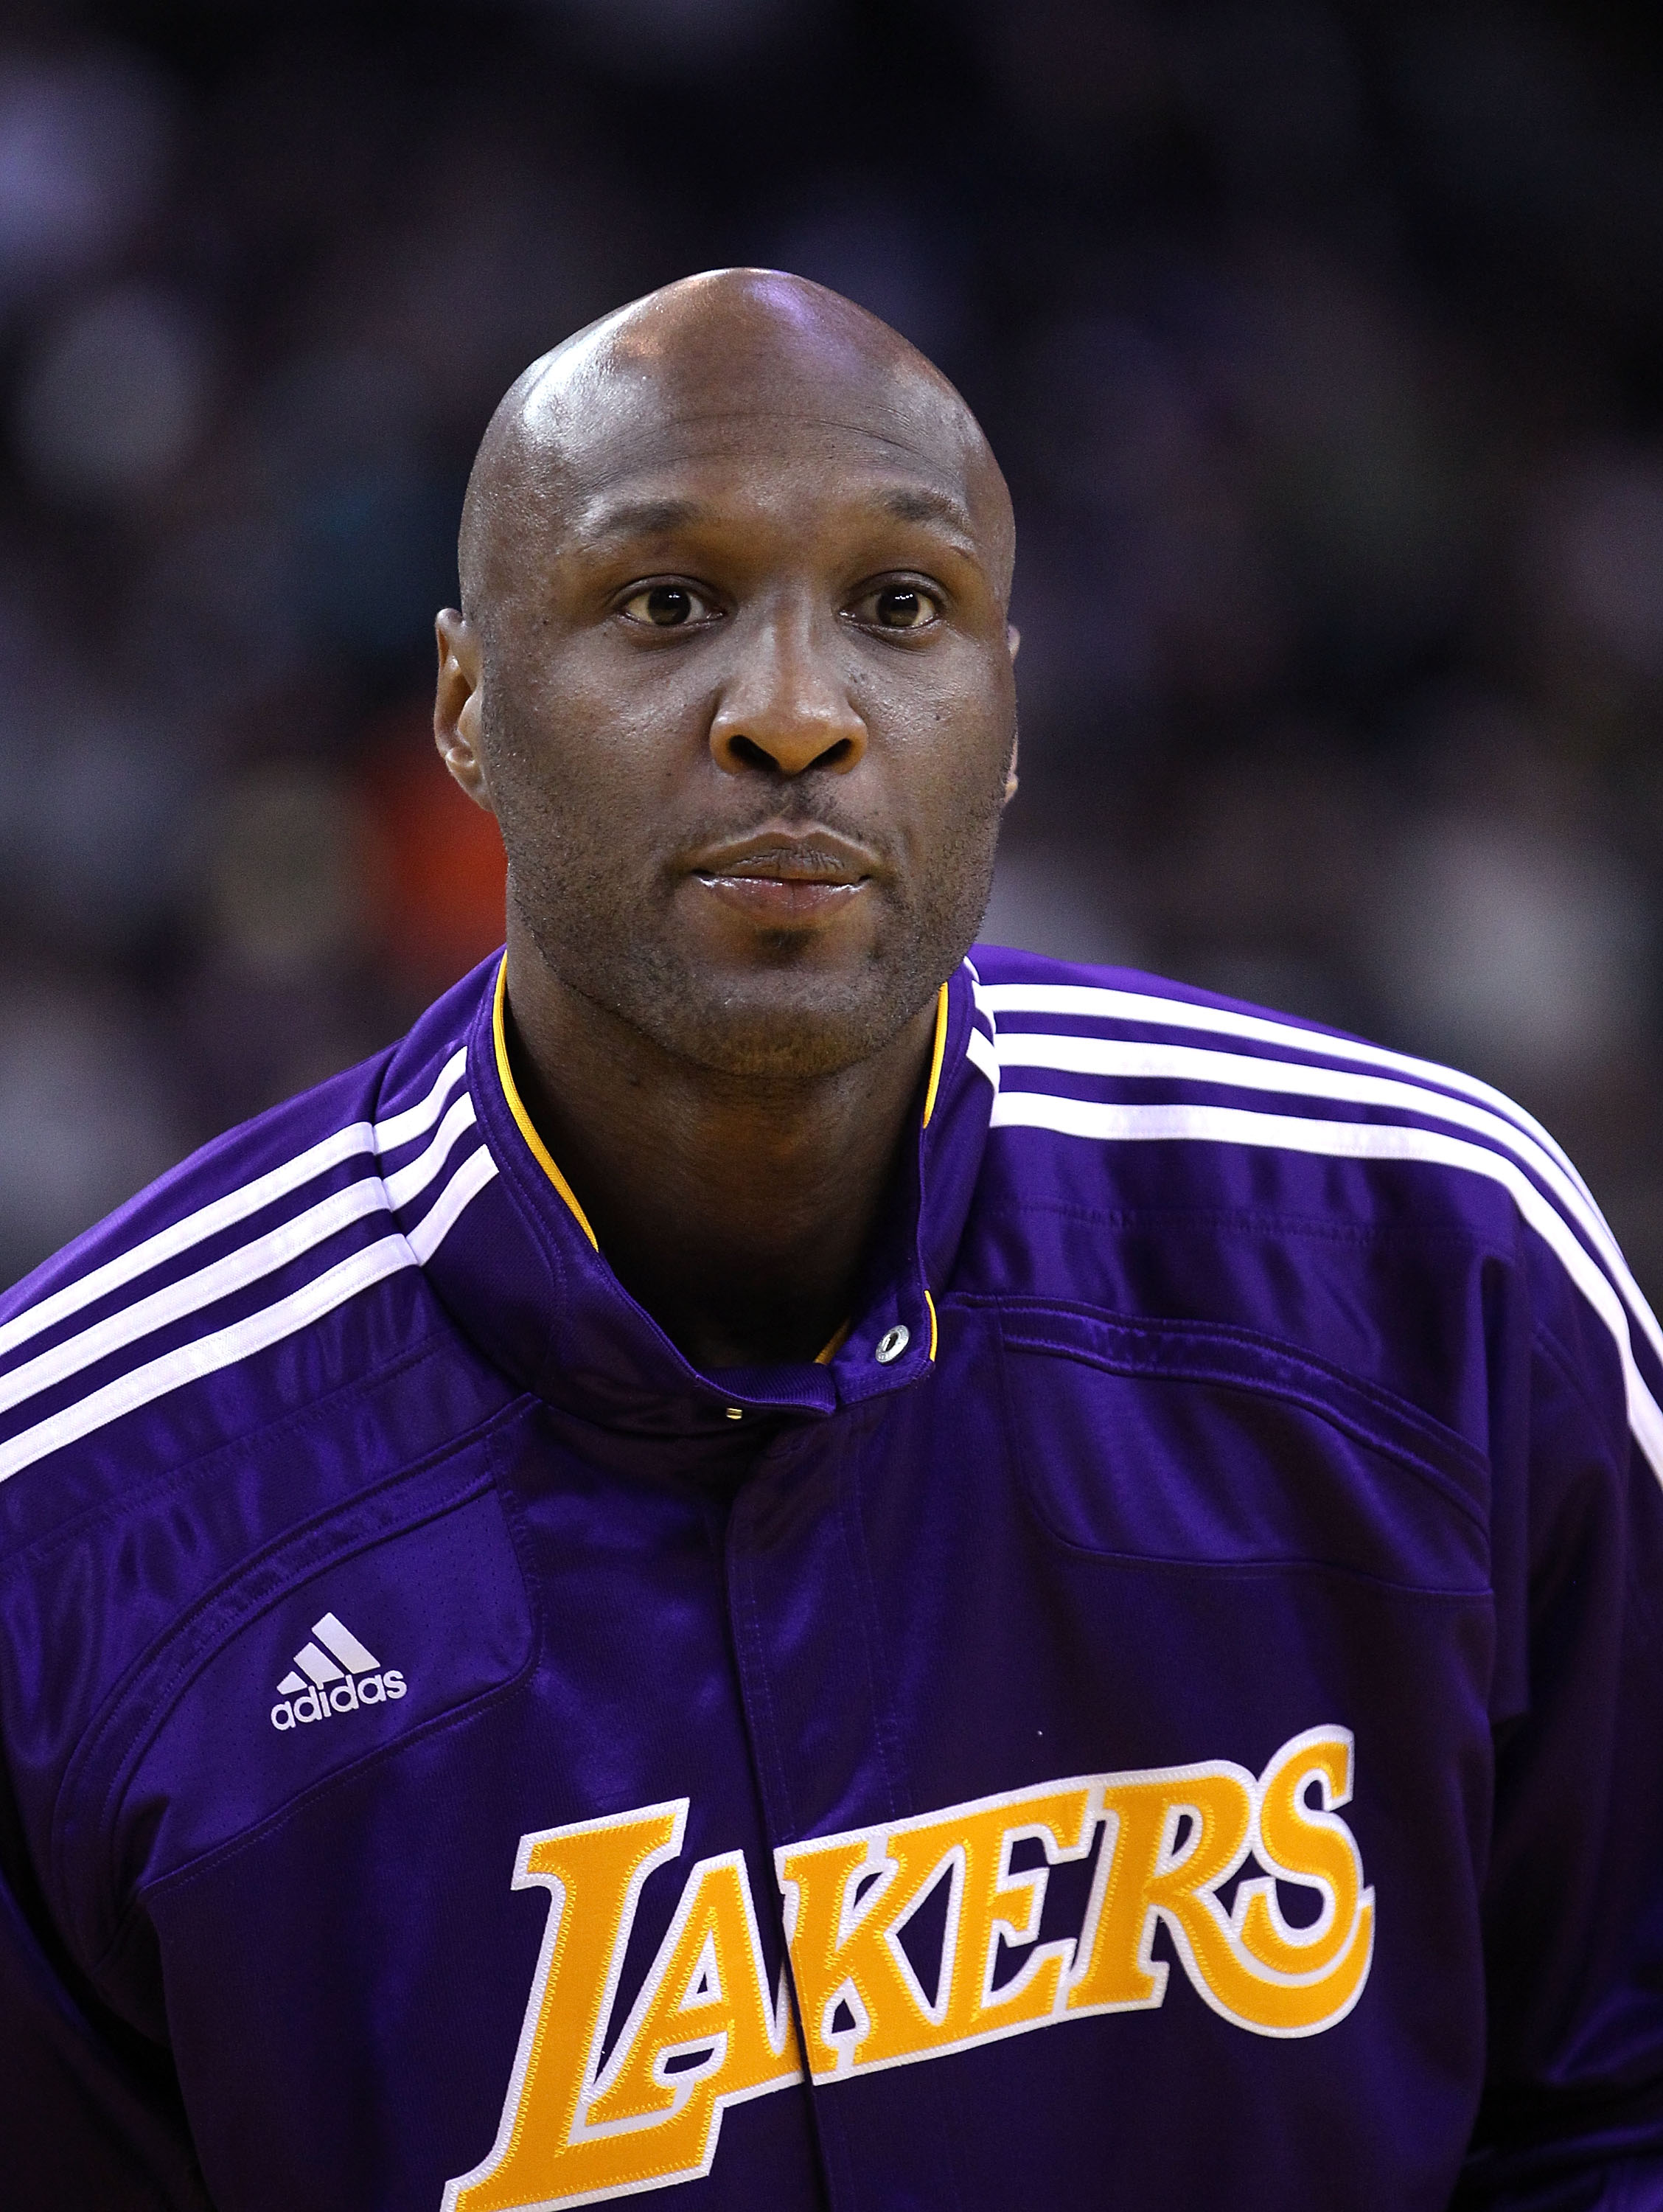 OAKLAND, CA - JANUARY 12:  Lamar Odom #7 of the Los Angeles Lakers warms up before their game against the Golden State Warriors at Oracle Arena on January 12, 2011 in Oakland, California. NOTE TO USER: User expressly acknowledges and agrees that, by downl